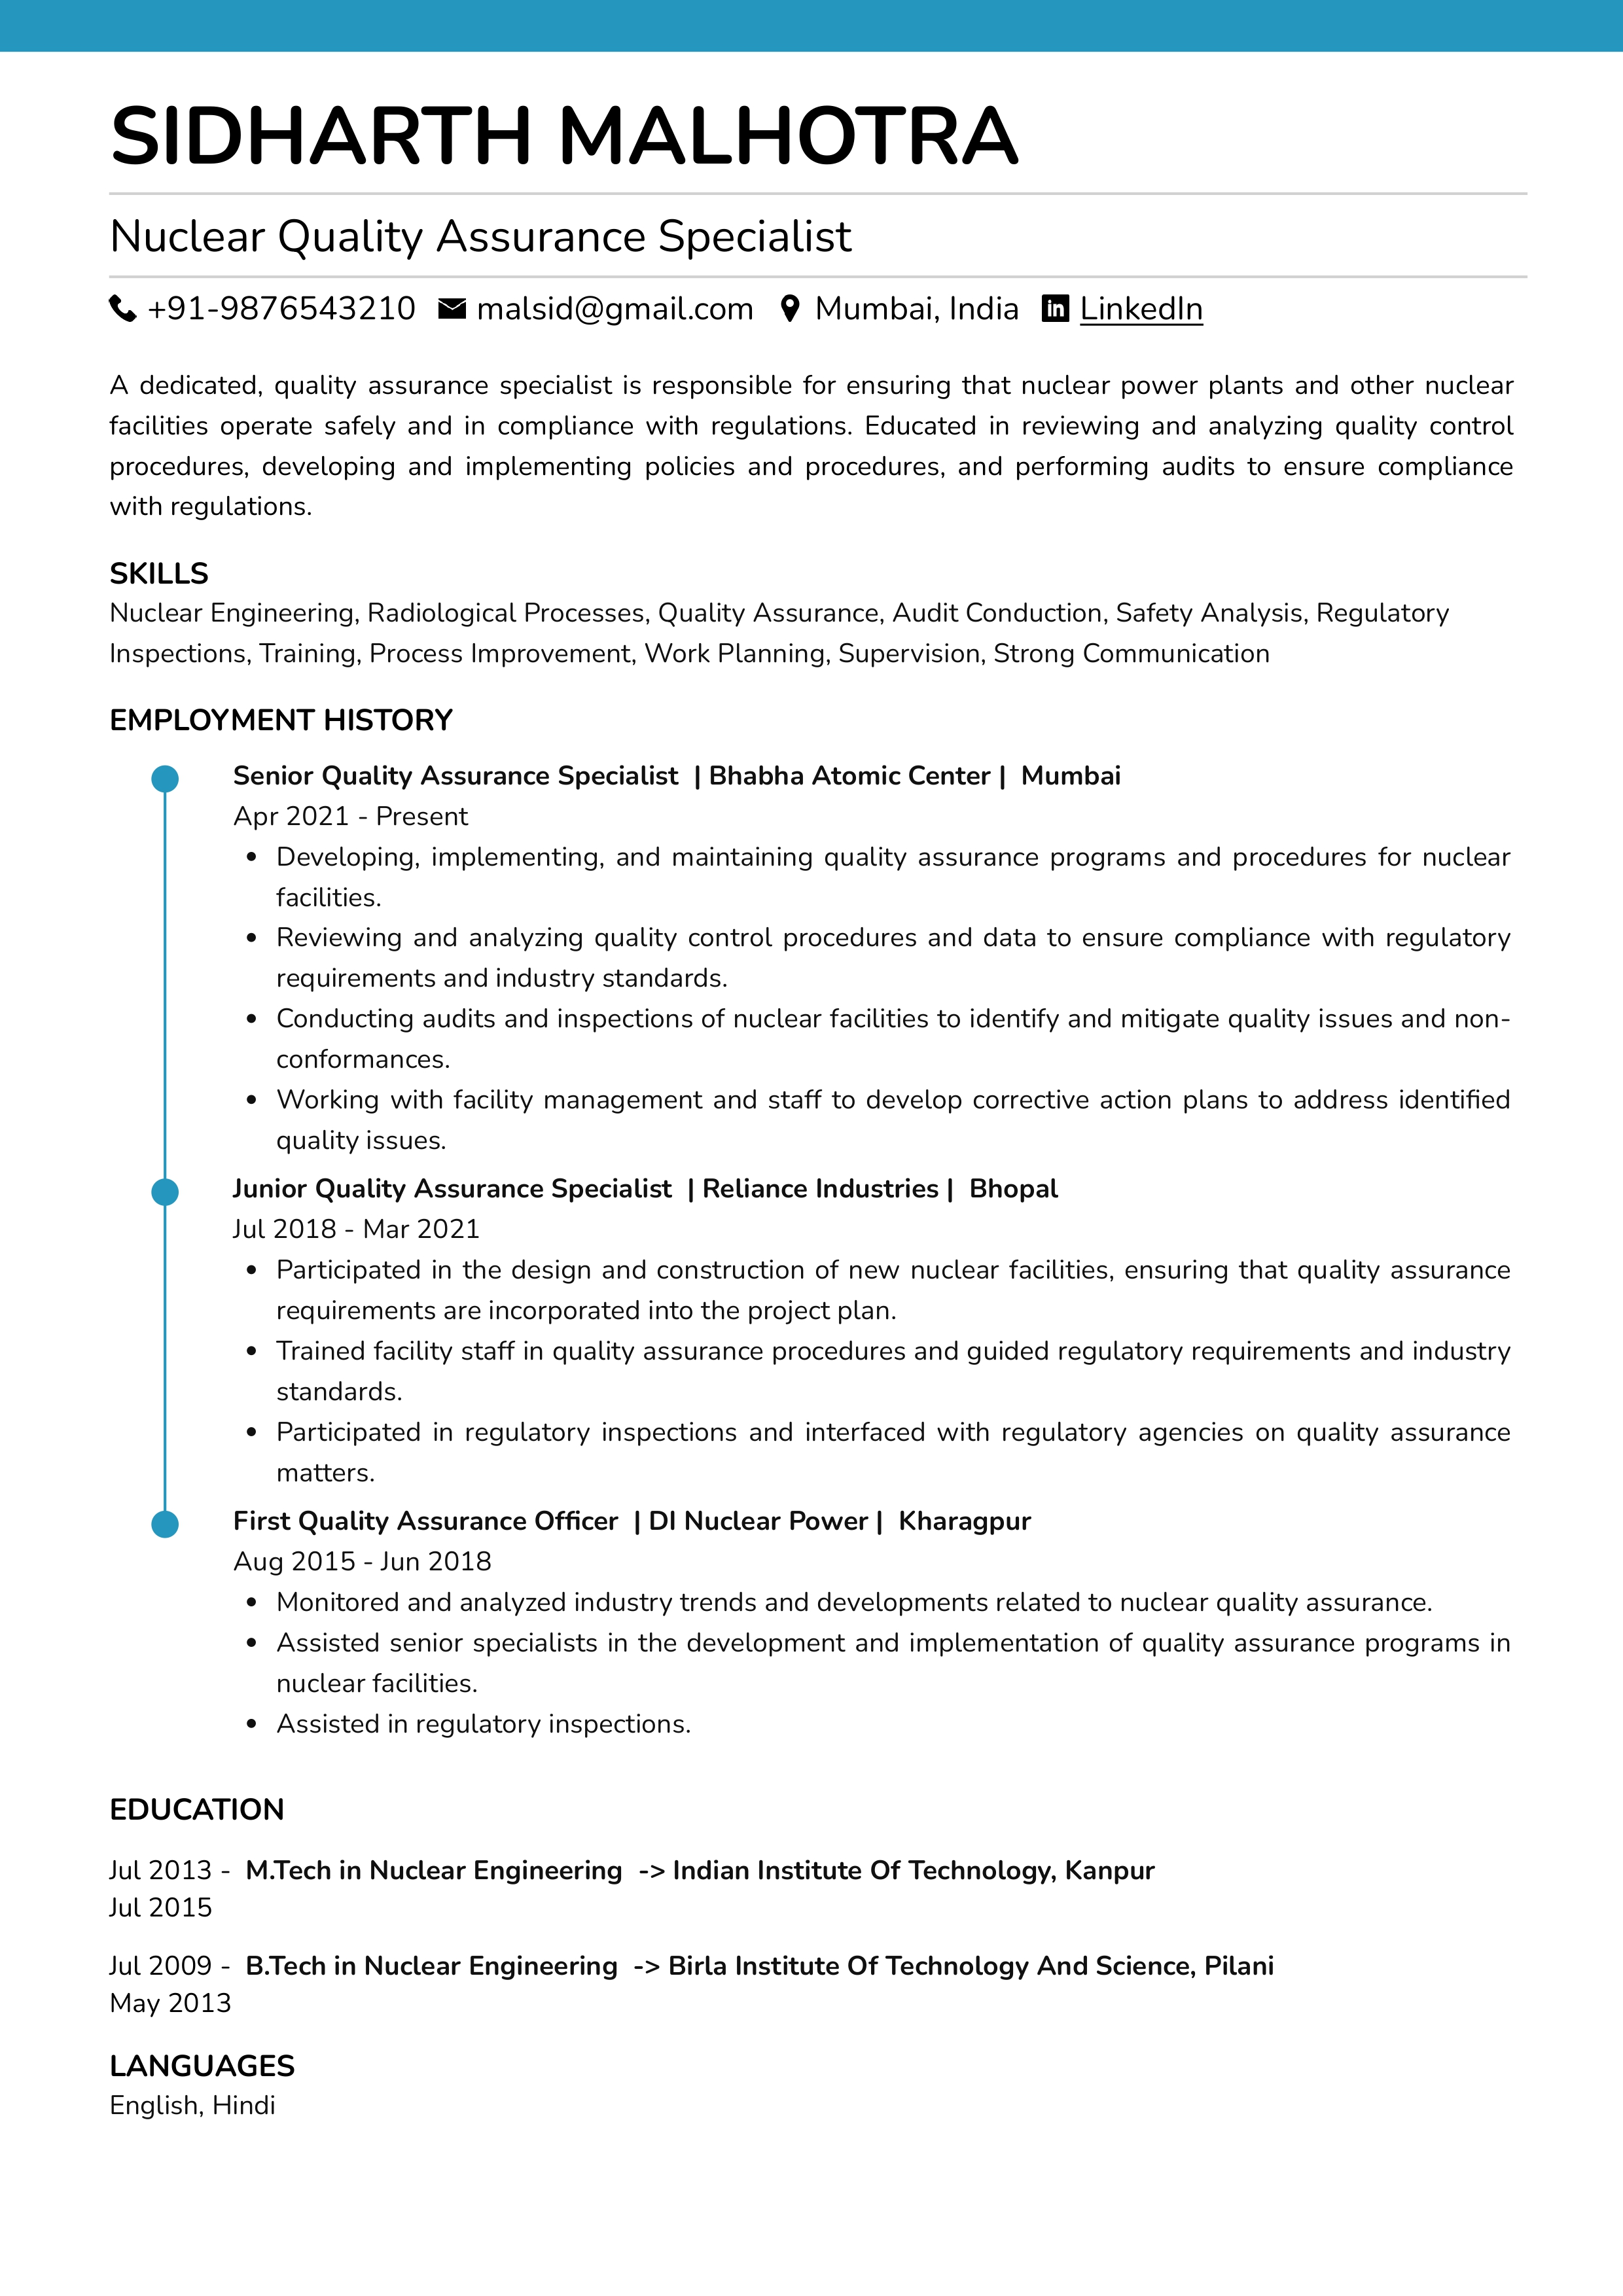 Resume of Nuclear Quality Assurance Specialist built on Resumod